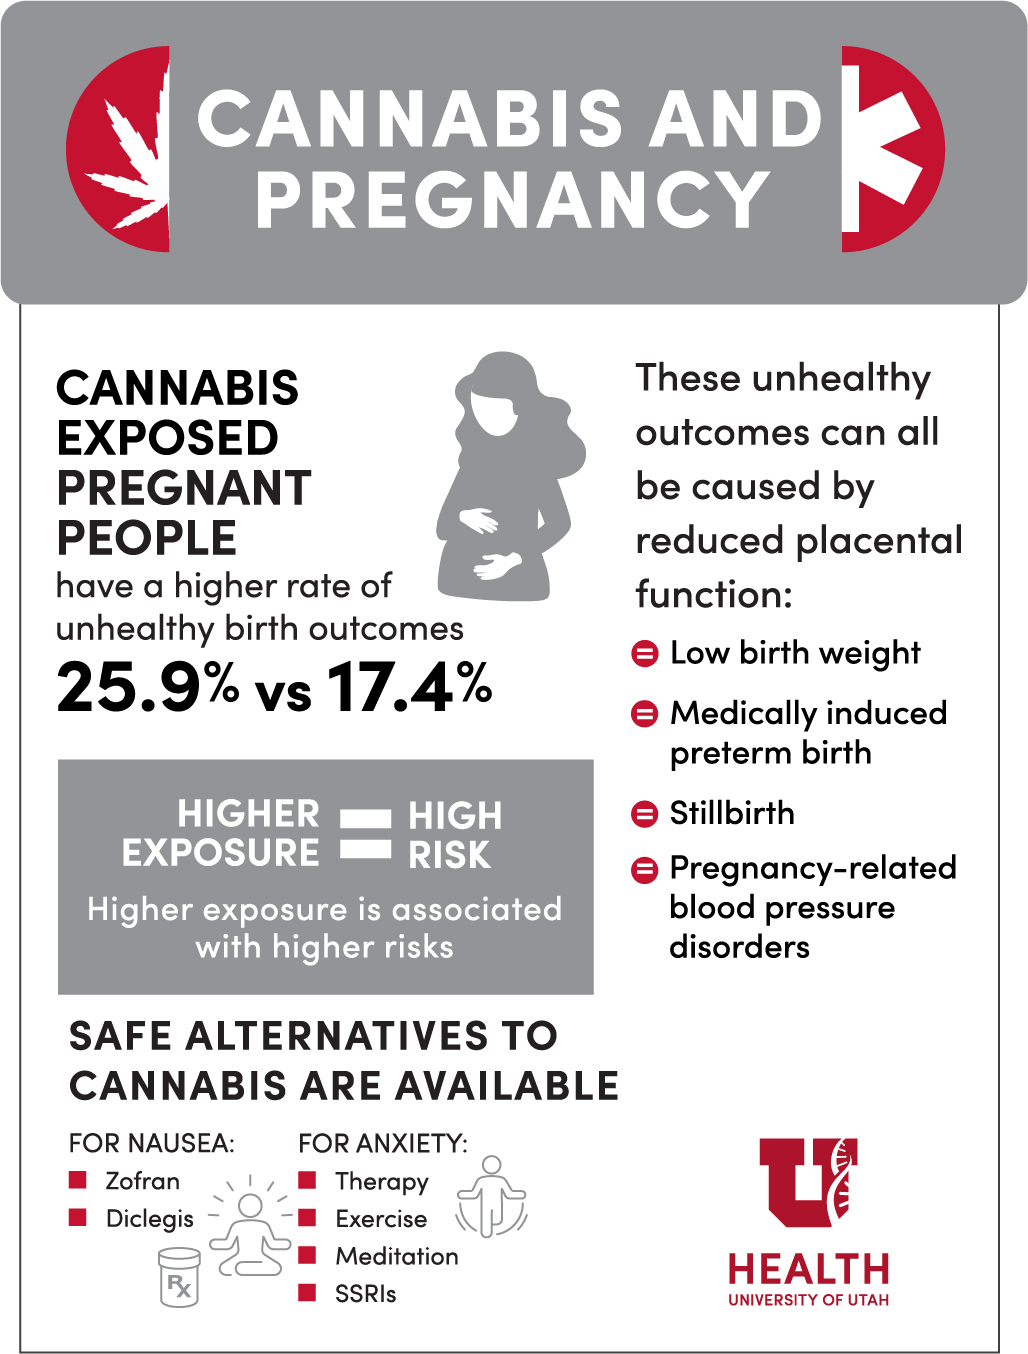 Infographic summarizing the effects of cannabis use for pregnant people